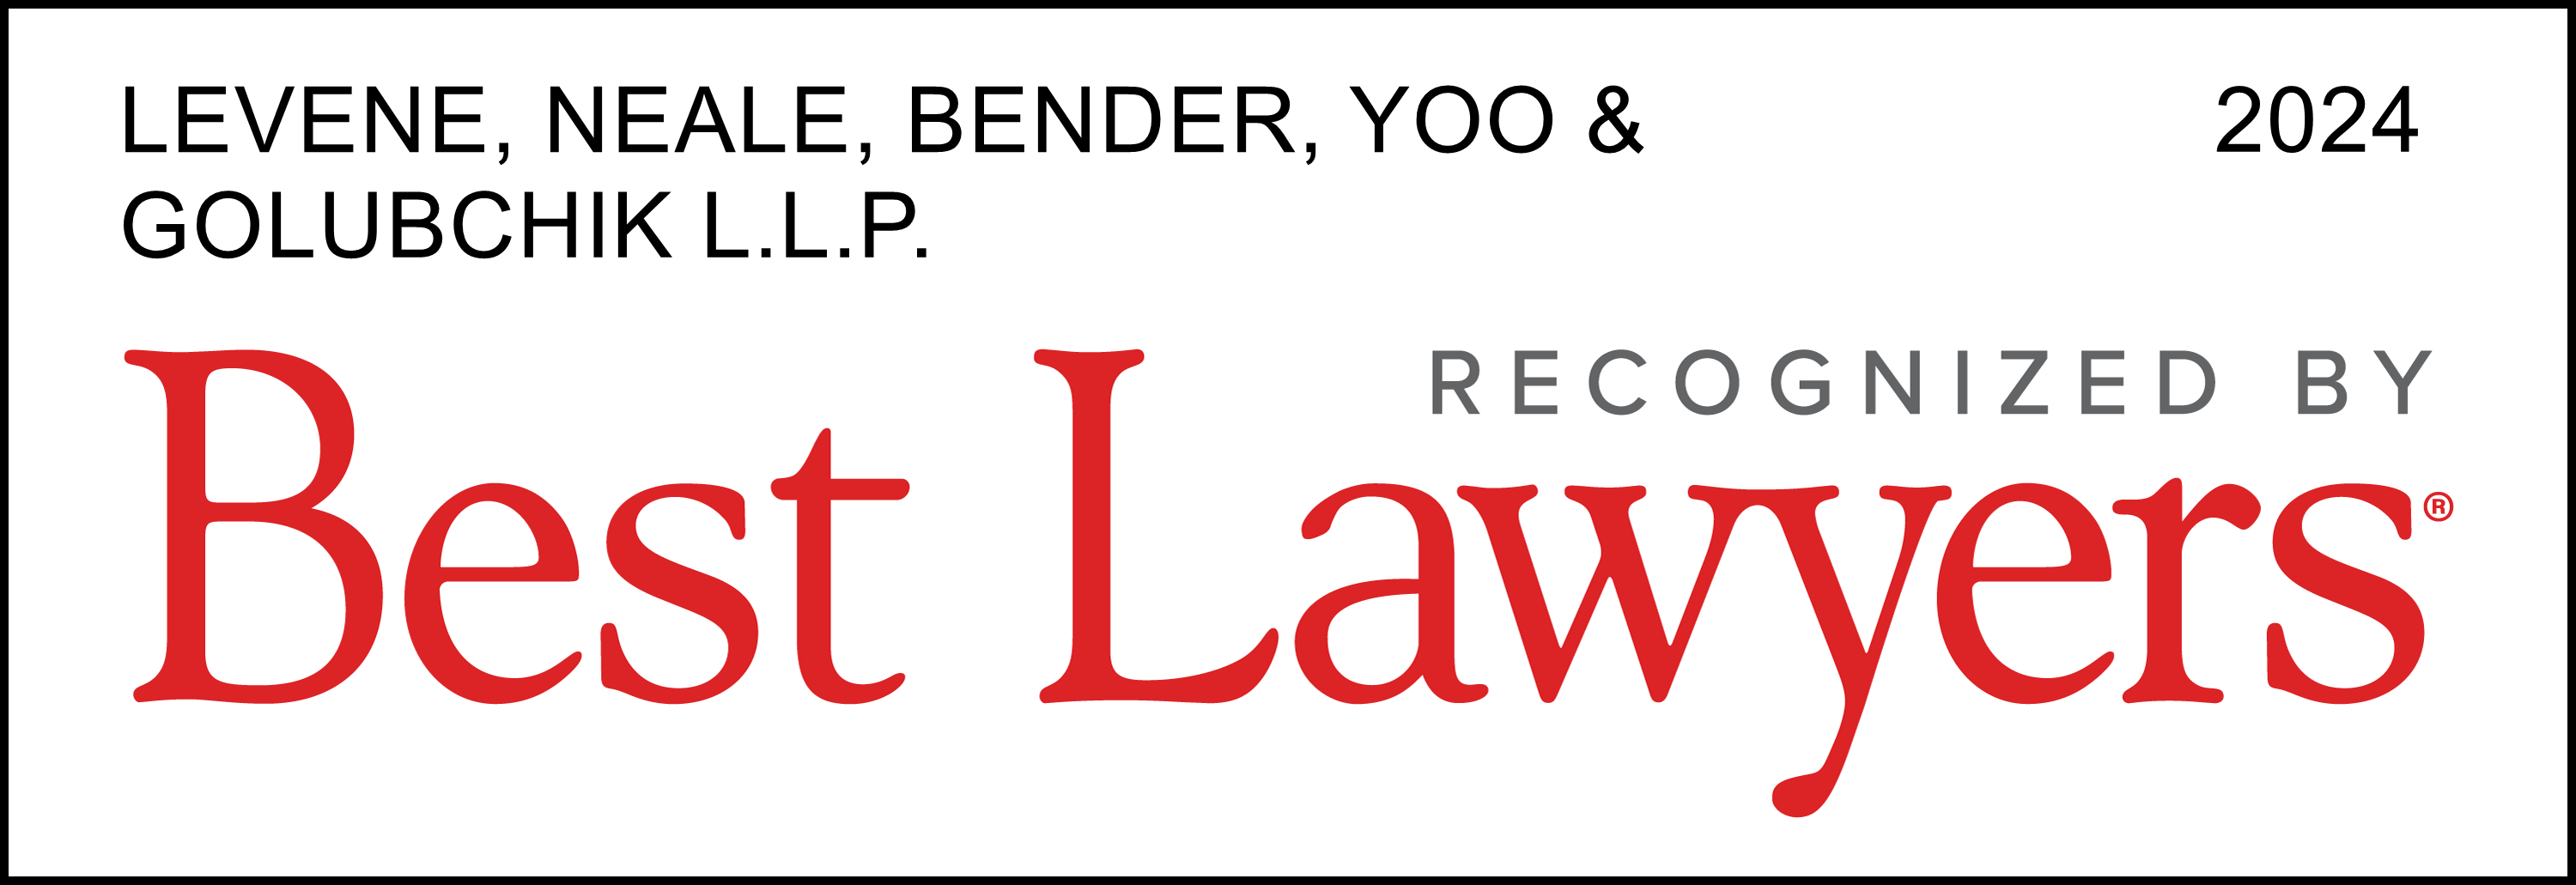 LNBYG and its Attorneys Recognized in The Best Lawyers in America®